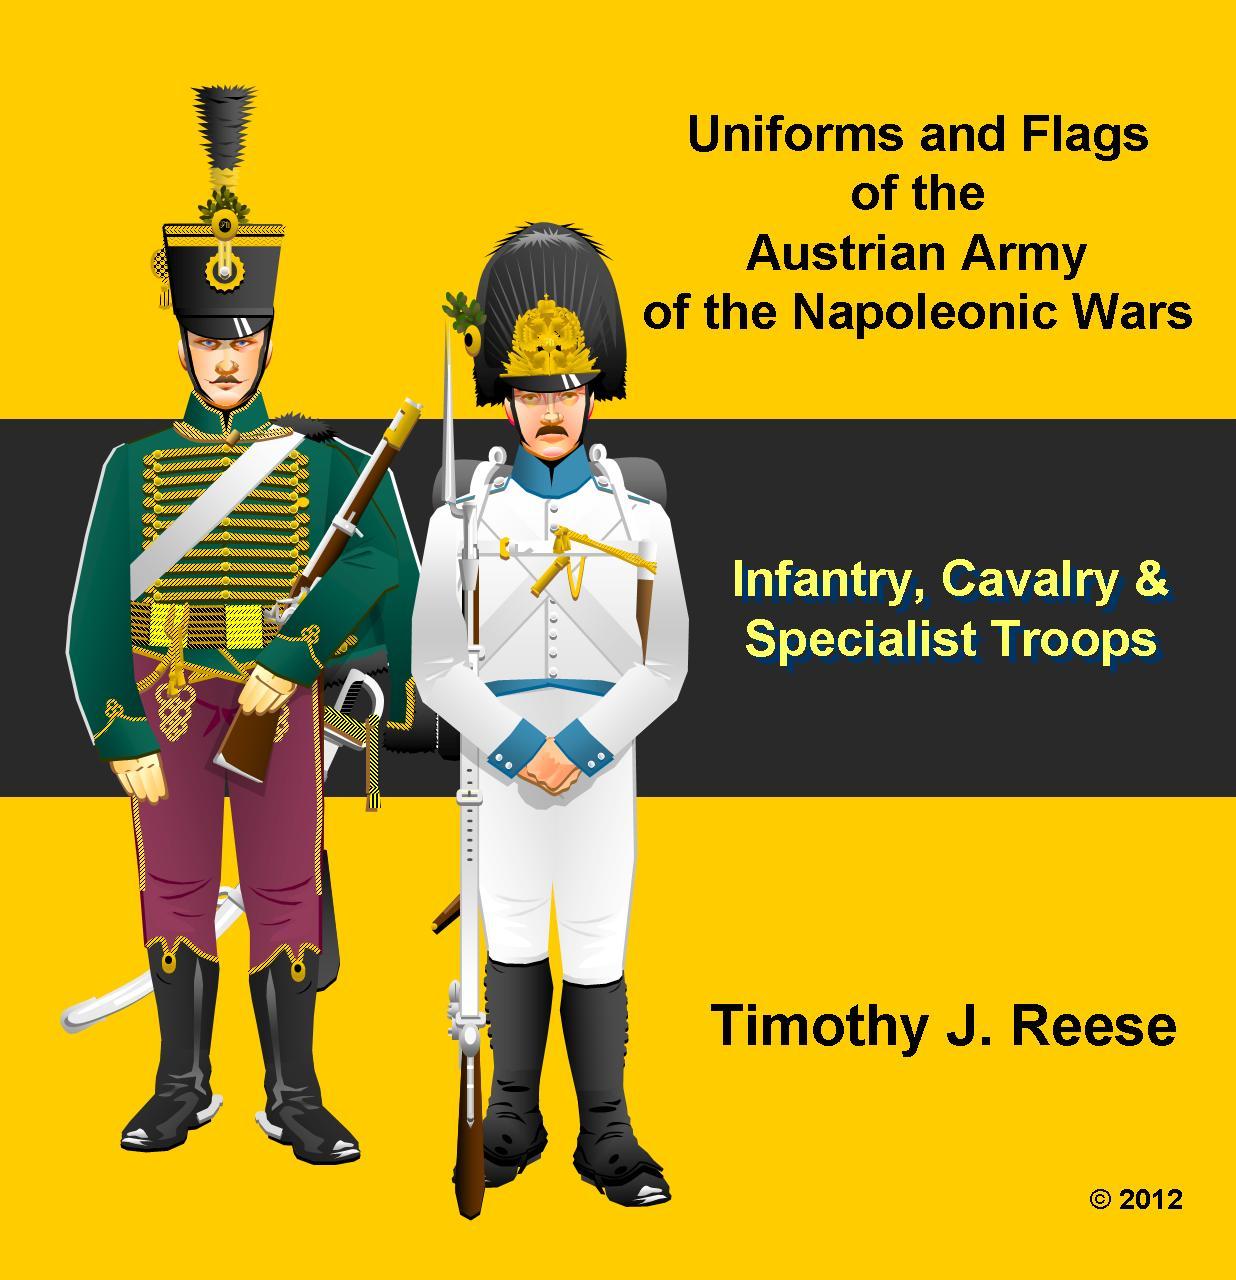 SAMPLE PLATE: Uniforms and Flags of the Austrian Army of the Napoleonic Wars